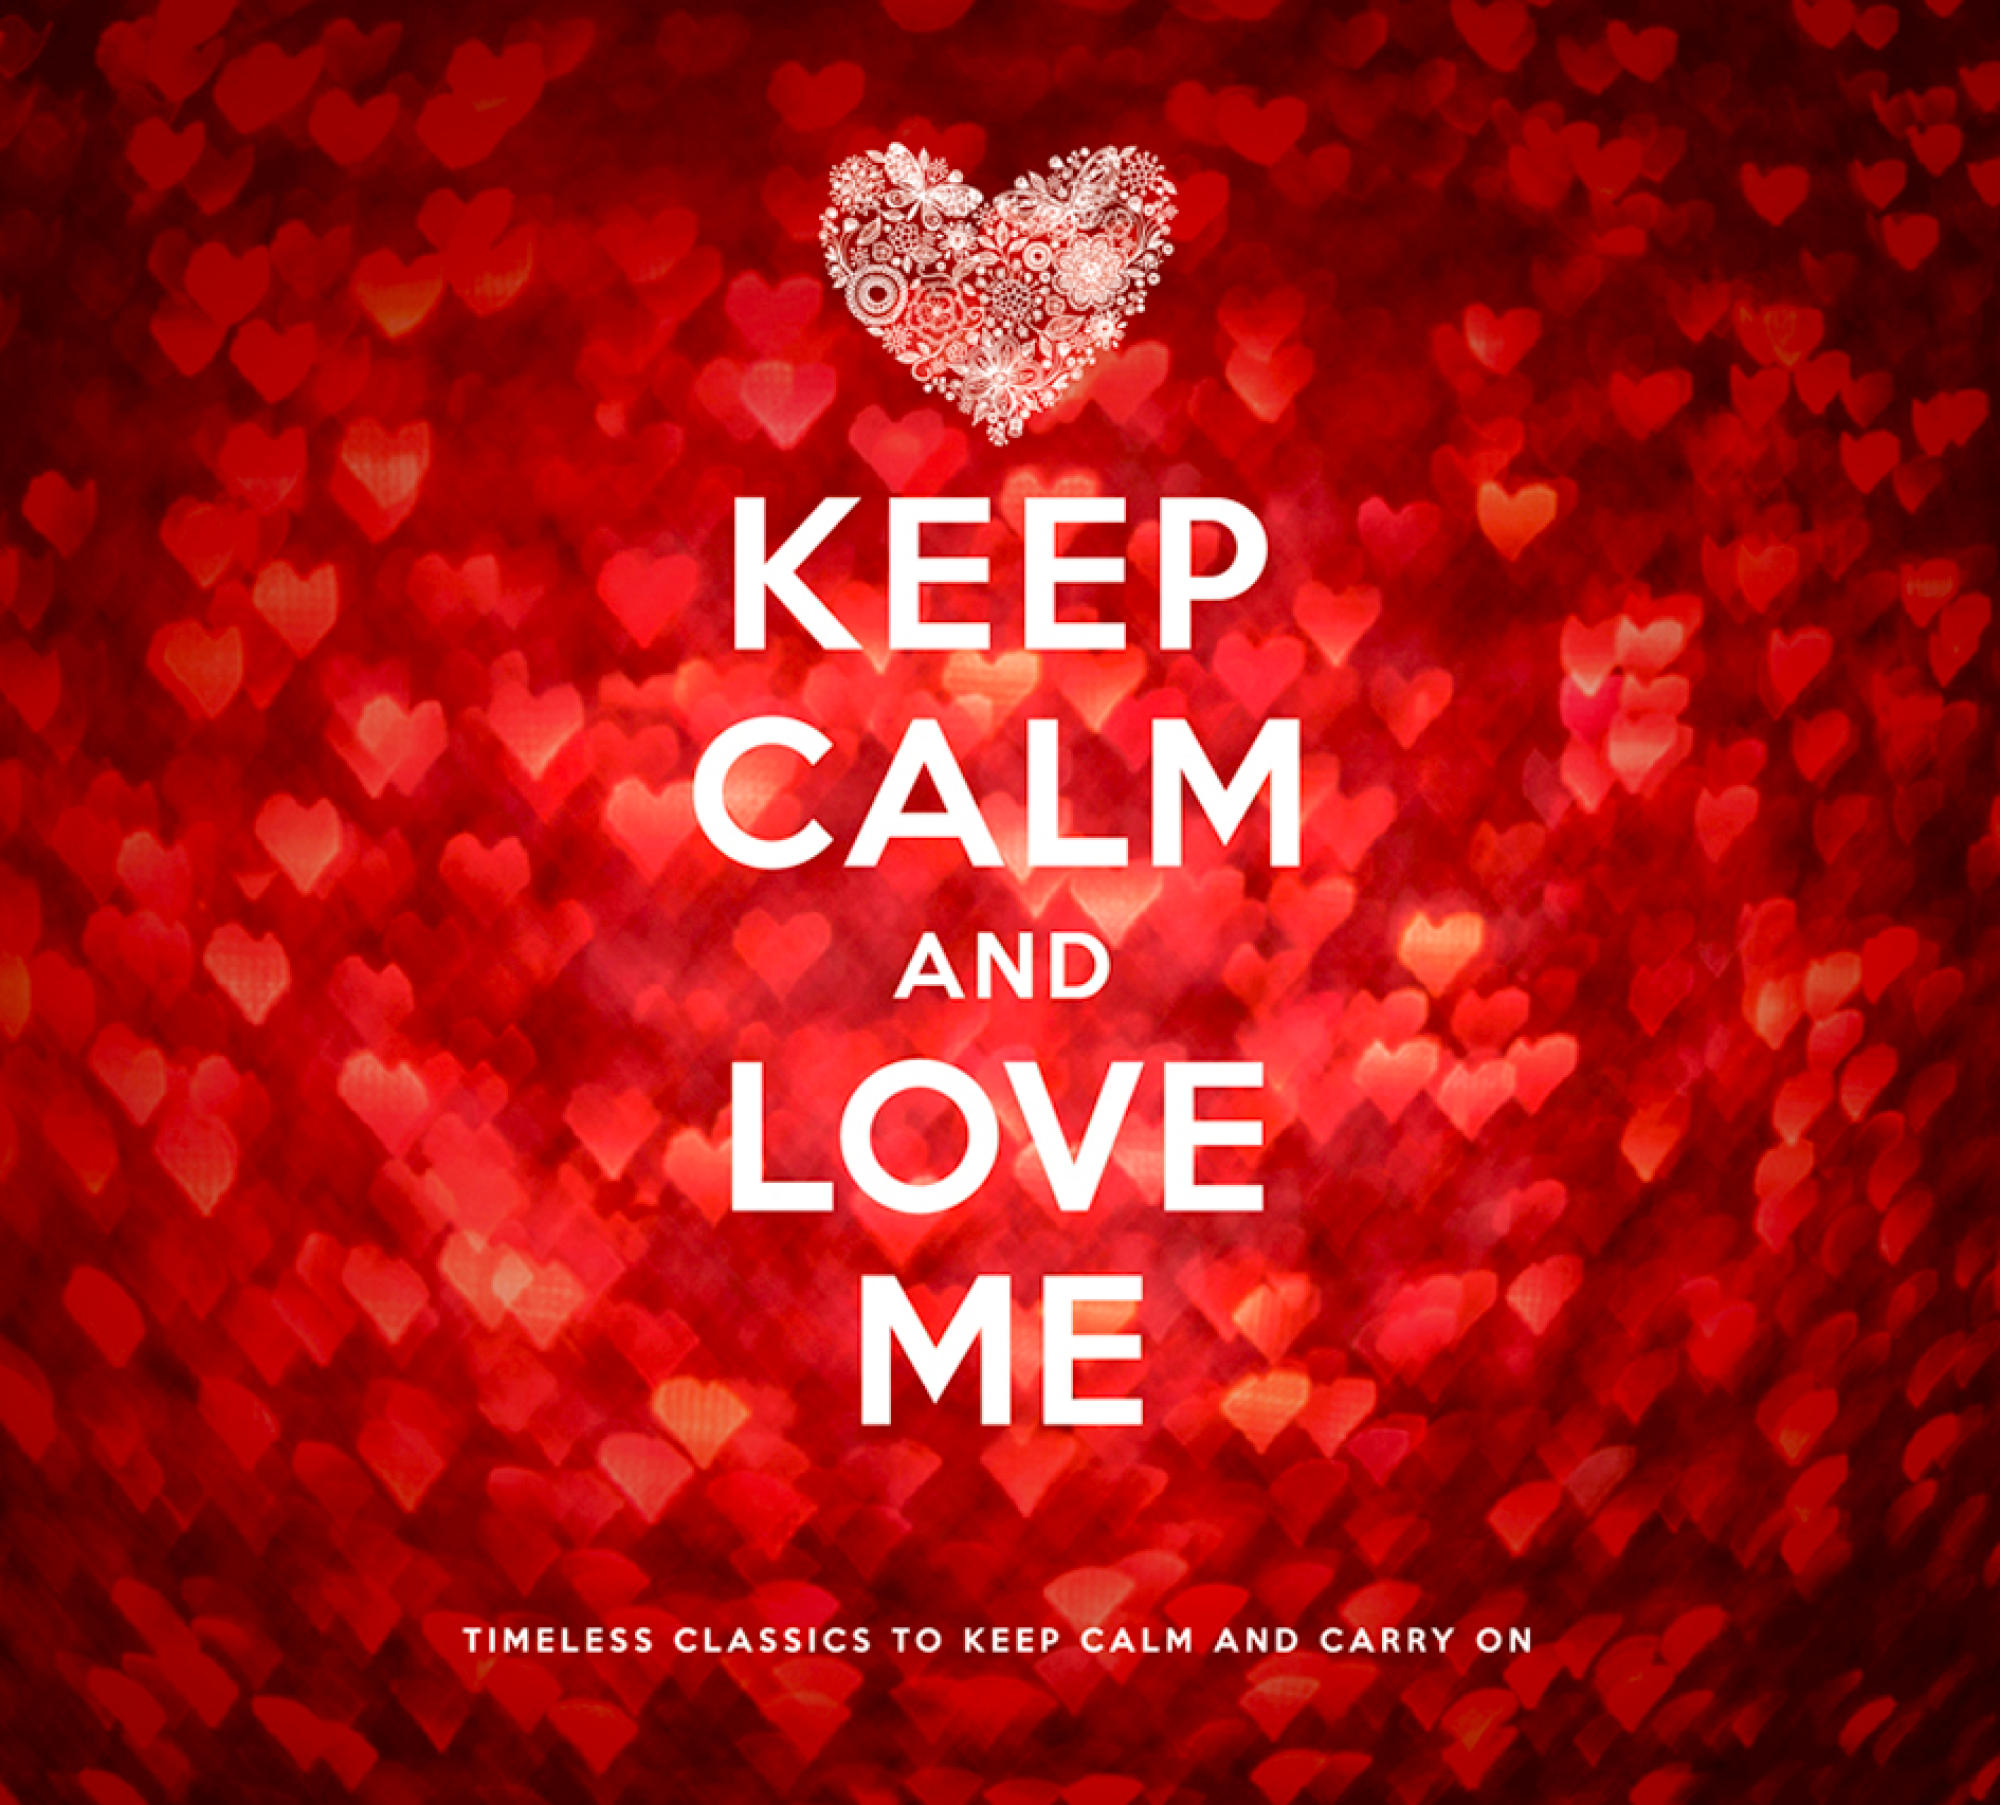 VARIOUS - Keep Calm (CD) Love - And Me